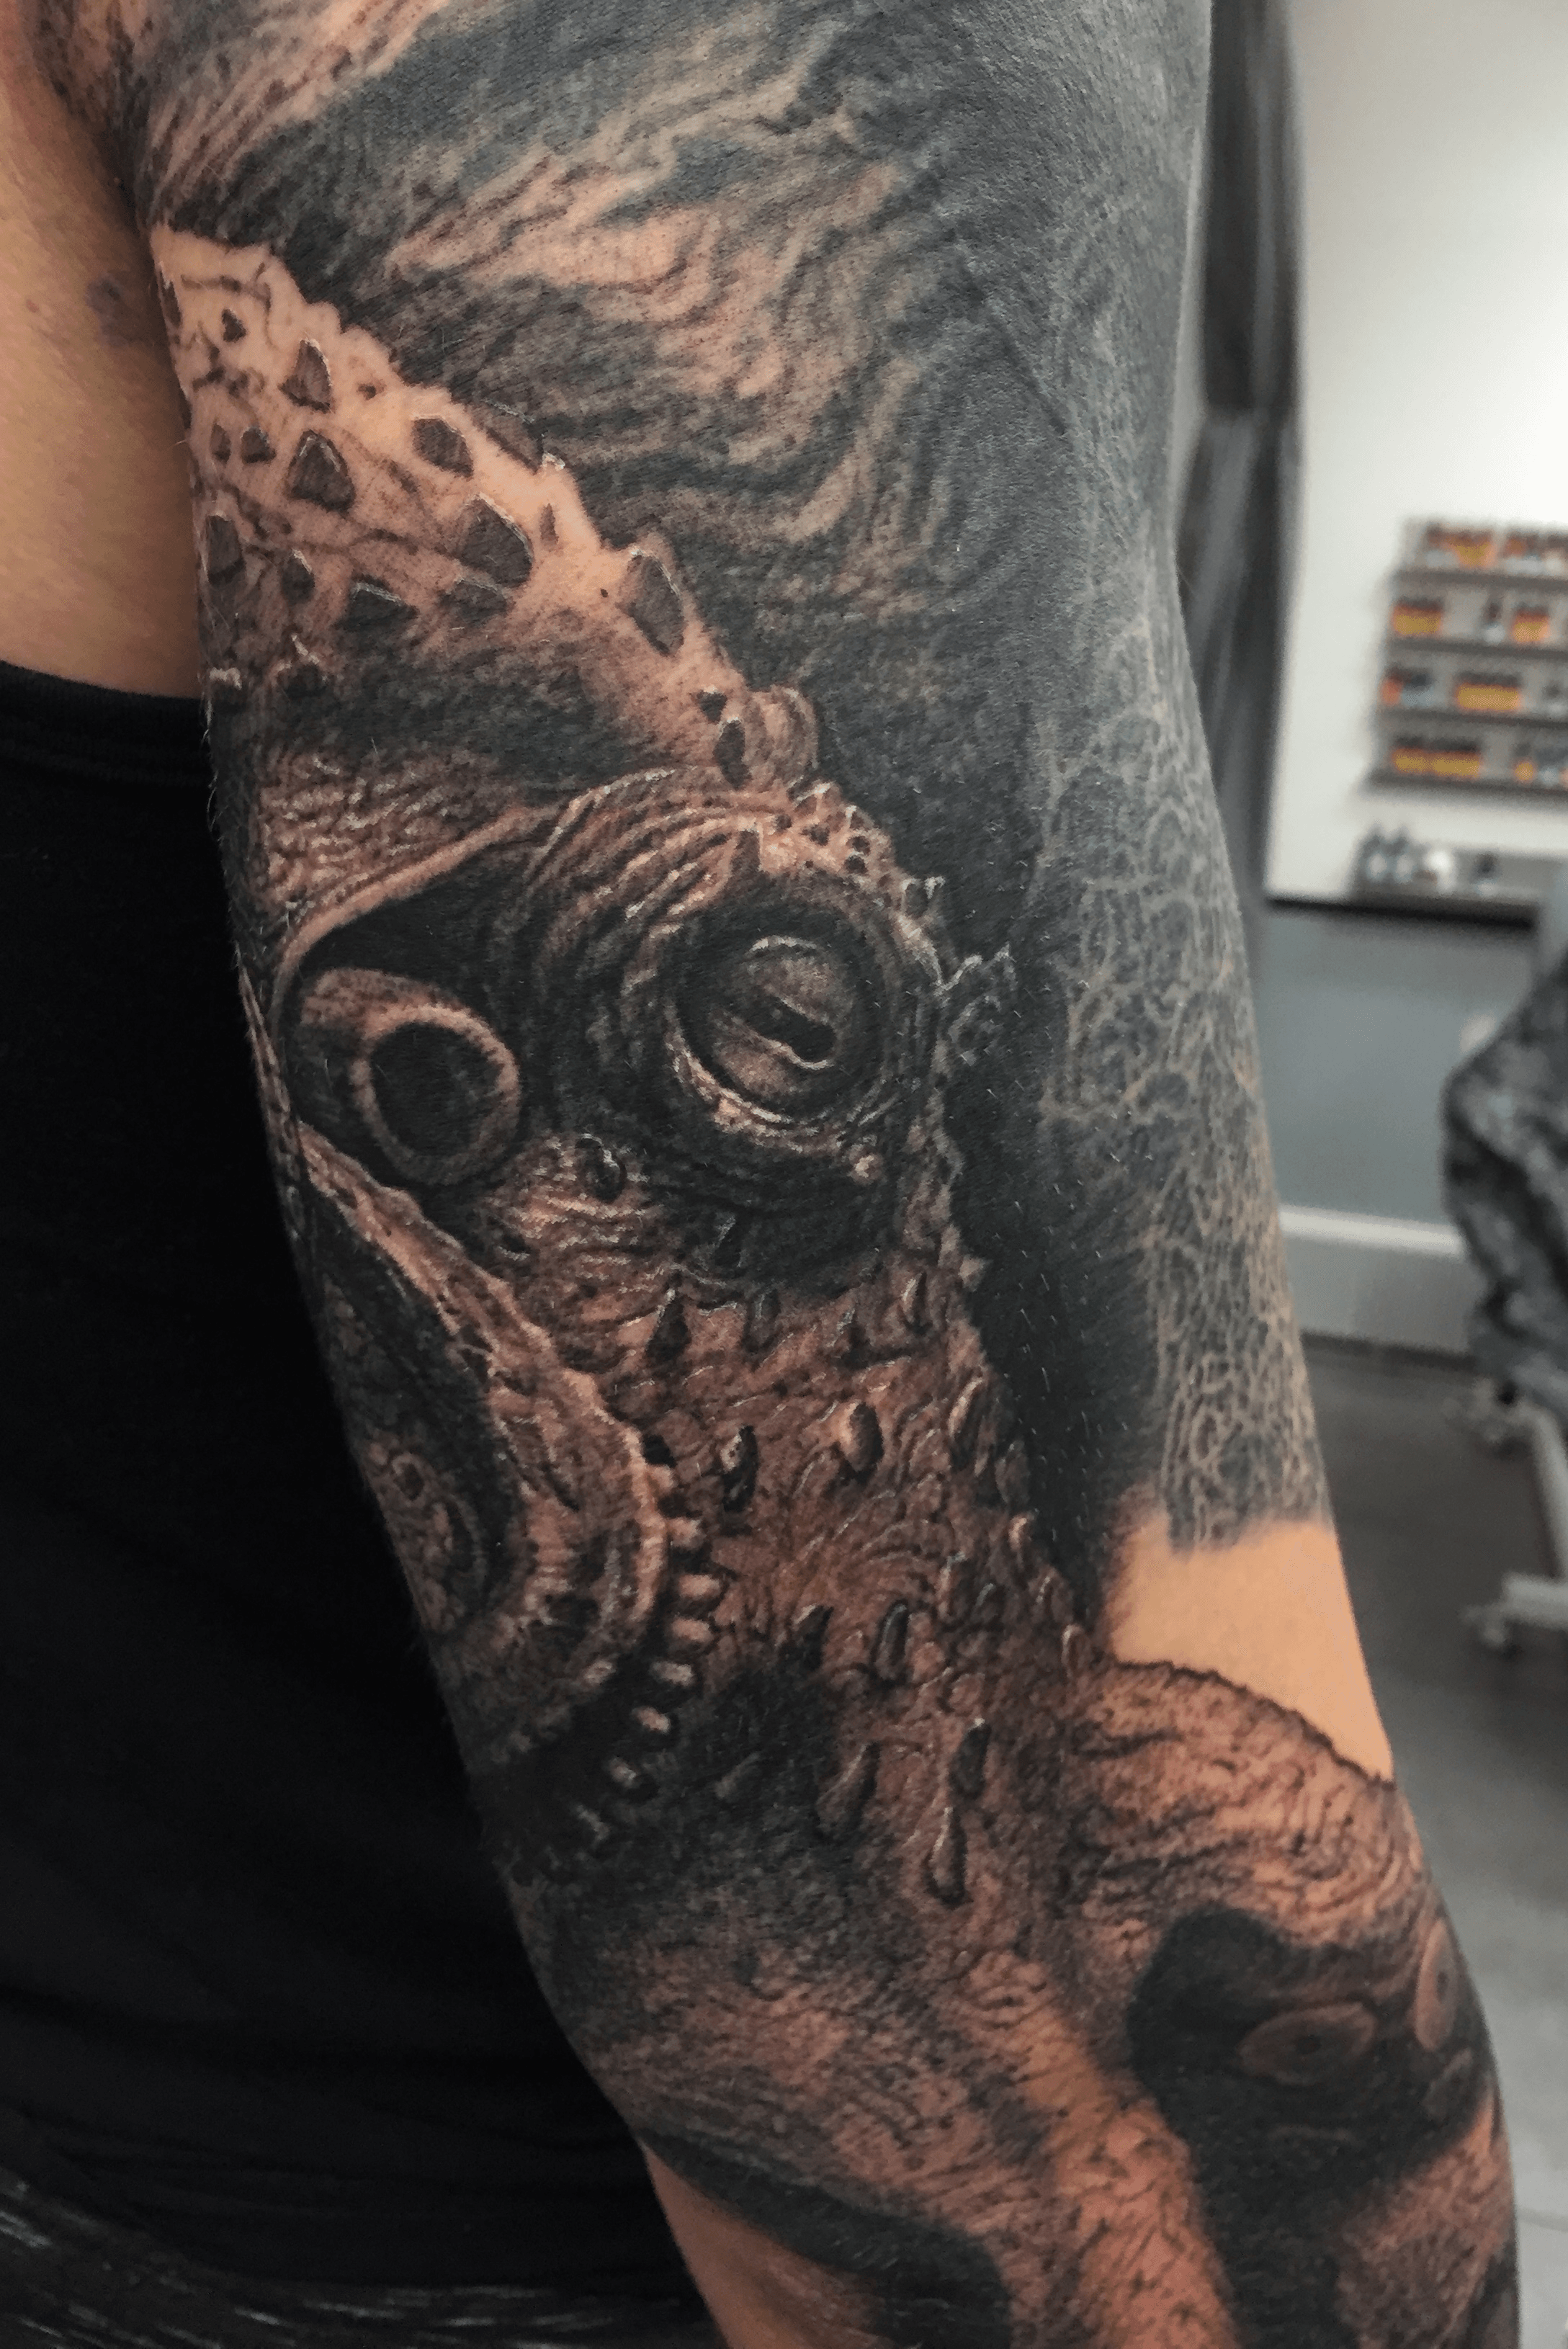 Male Octopus Tattoo Ideas On Shoulder And Chest  Tattoo designs men Octopus  tattoo sleeve Tattoo ideas males